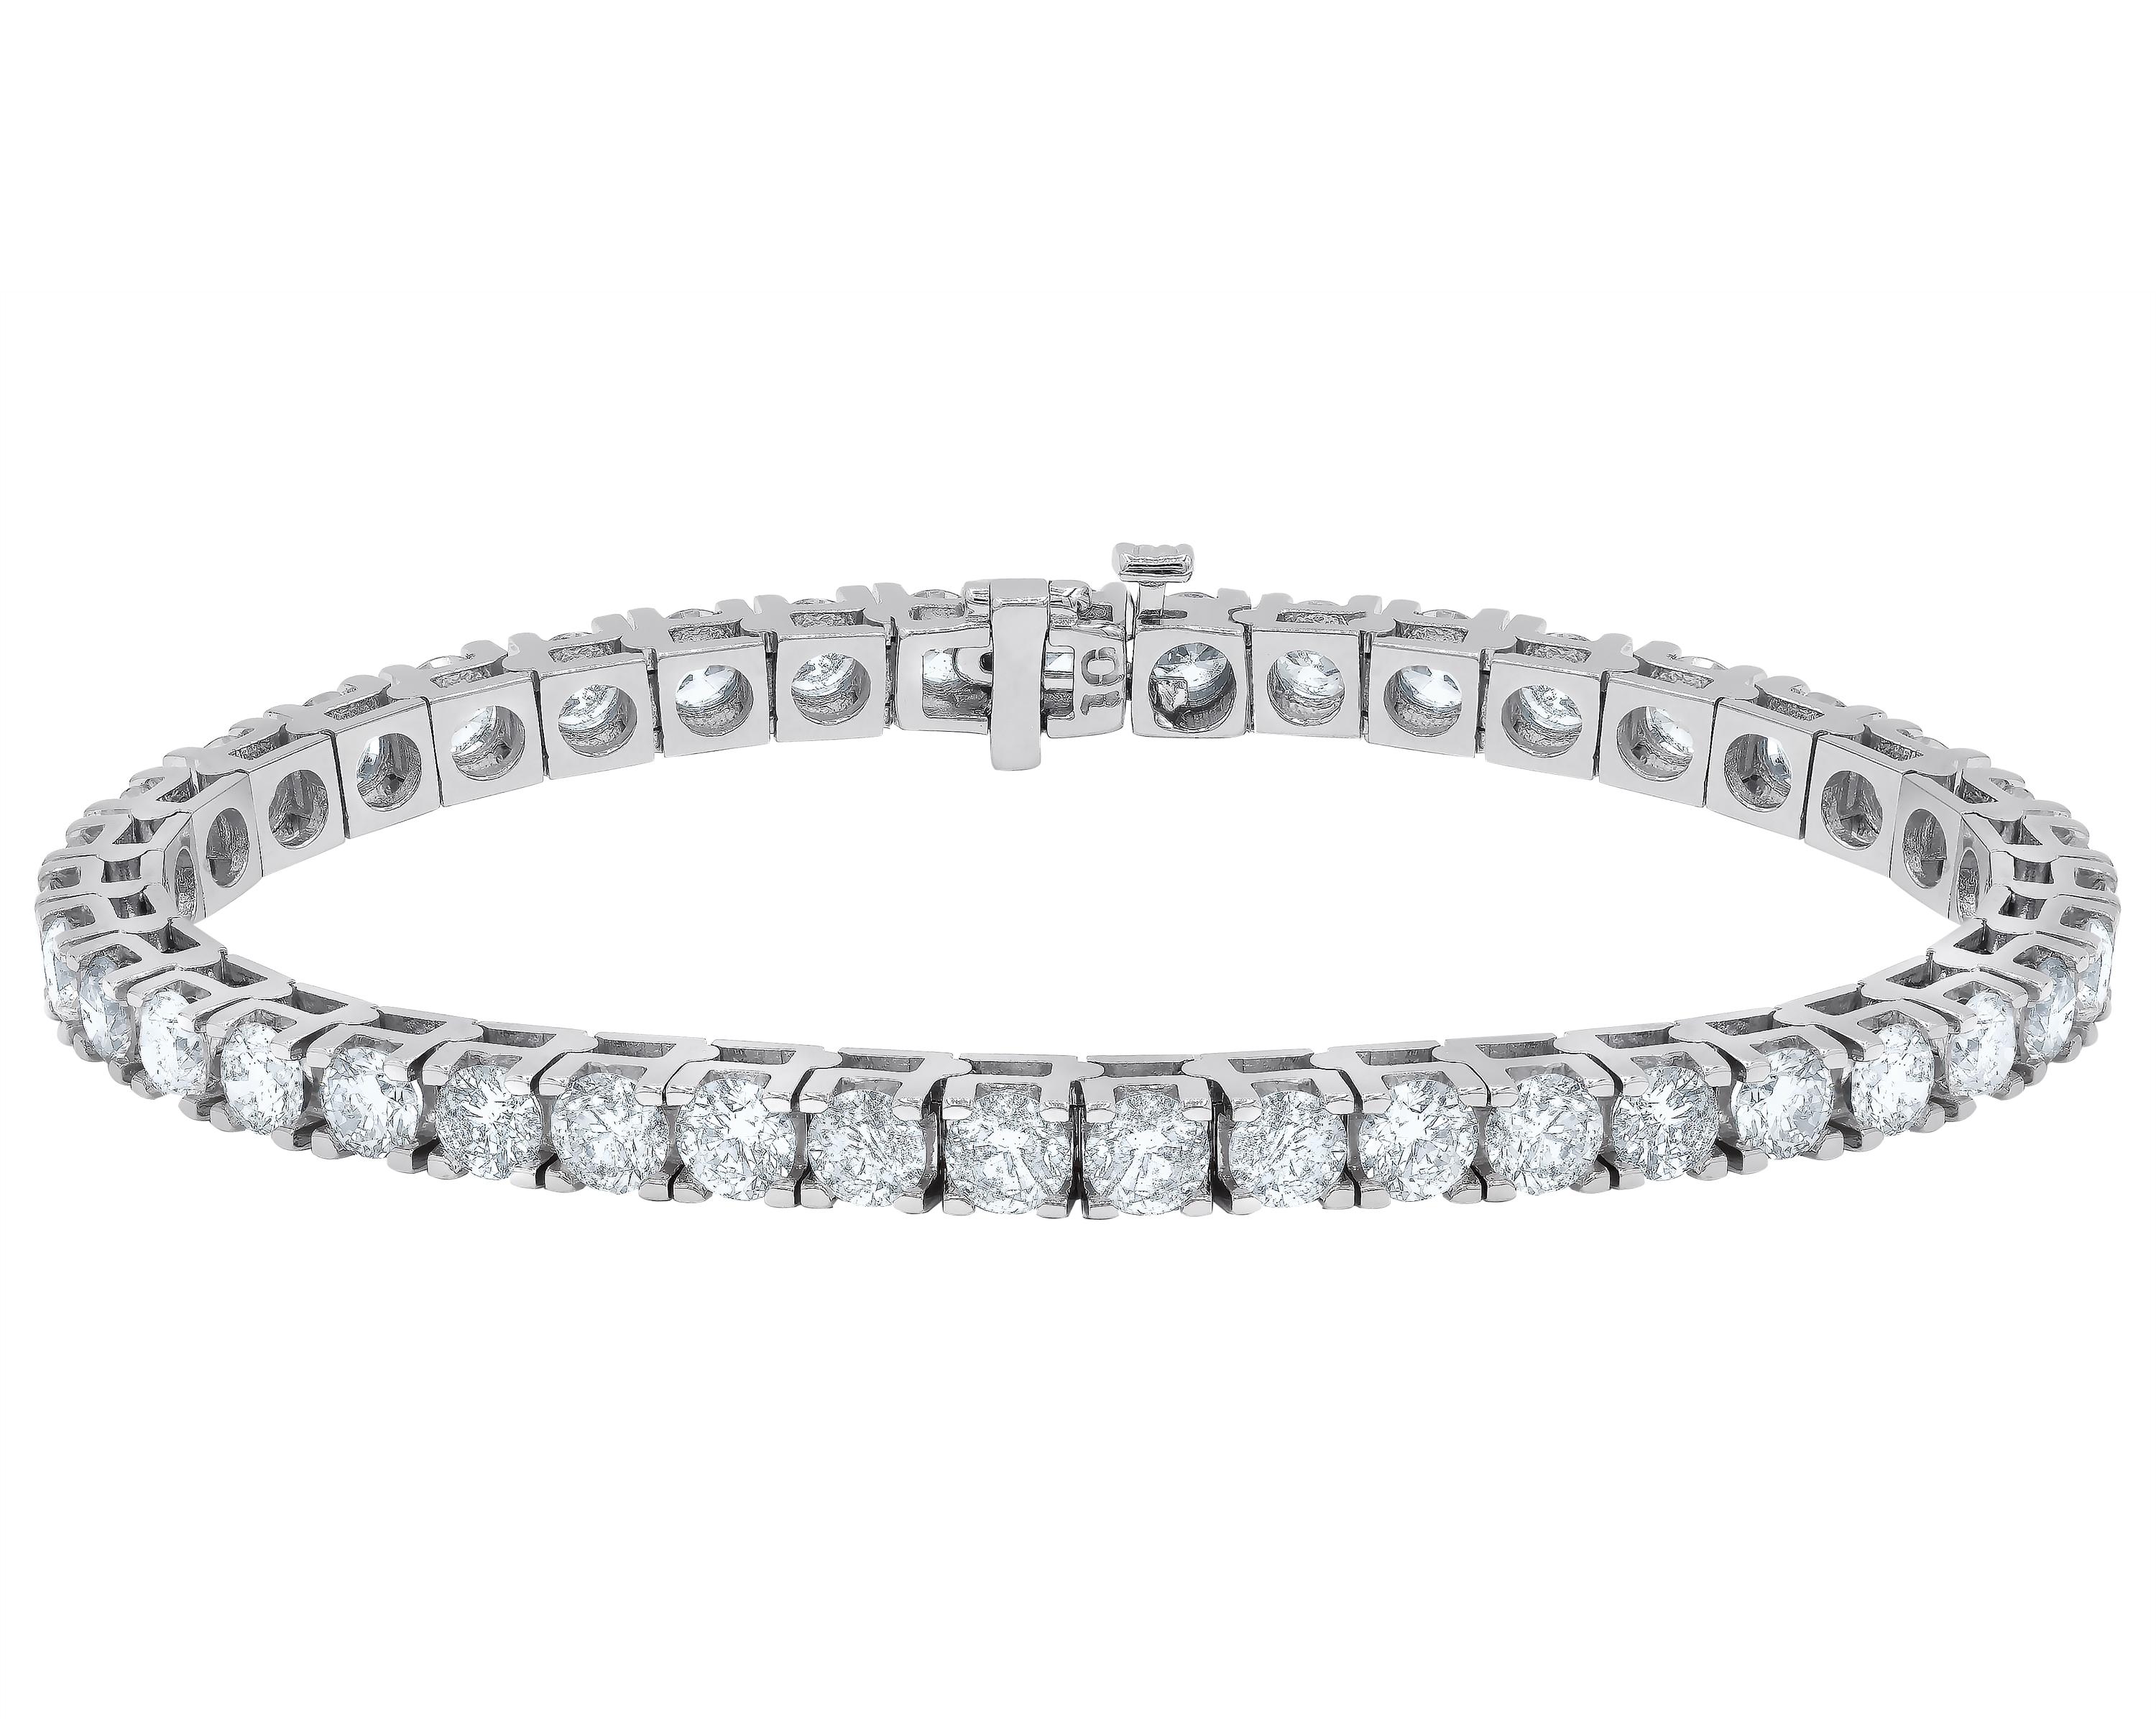 Custom 14kt white gold 8.00 cts round diamond tennis bracelet 45 stones 0.19 each stone set in 4-prongs GH color SI clarity.  Excellent Cut.